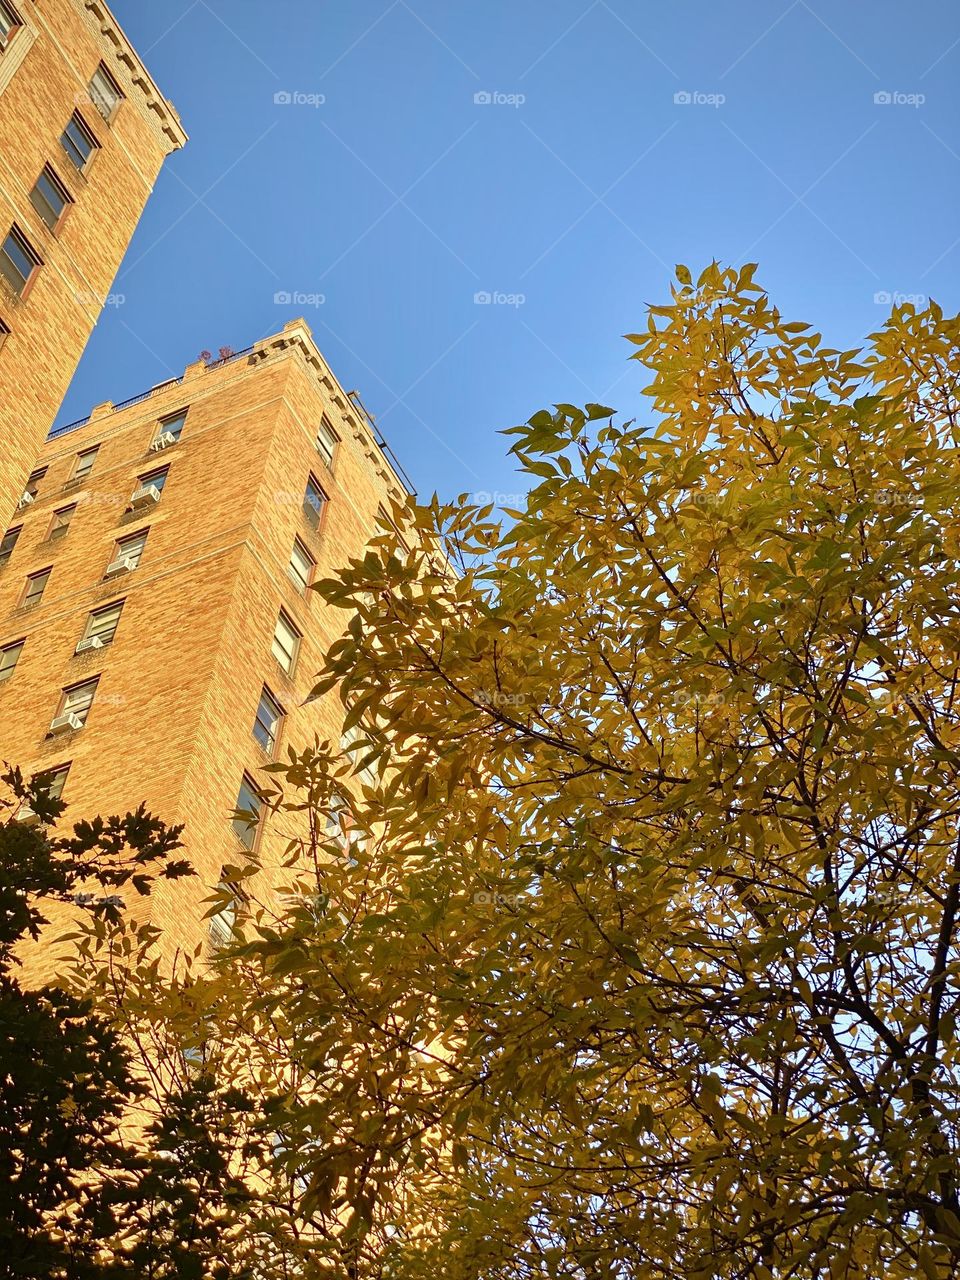 Exterior of a modern building New York with trees turning colors in Autumn.